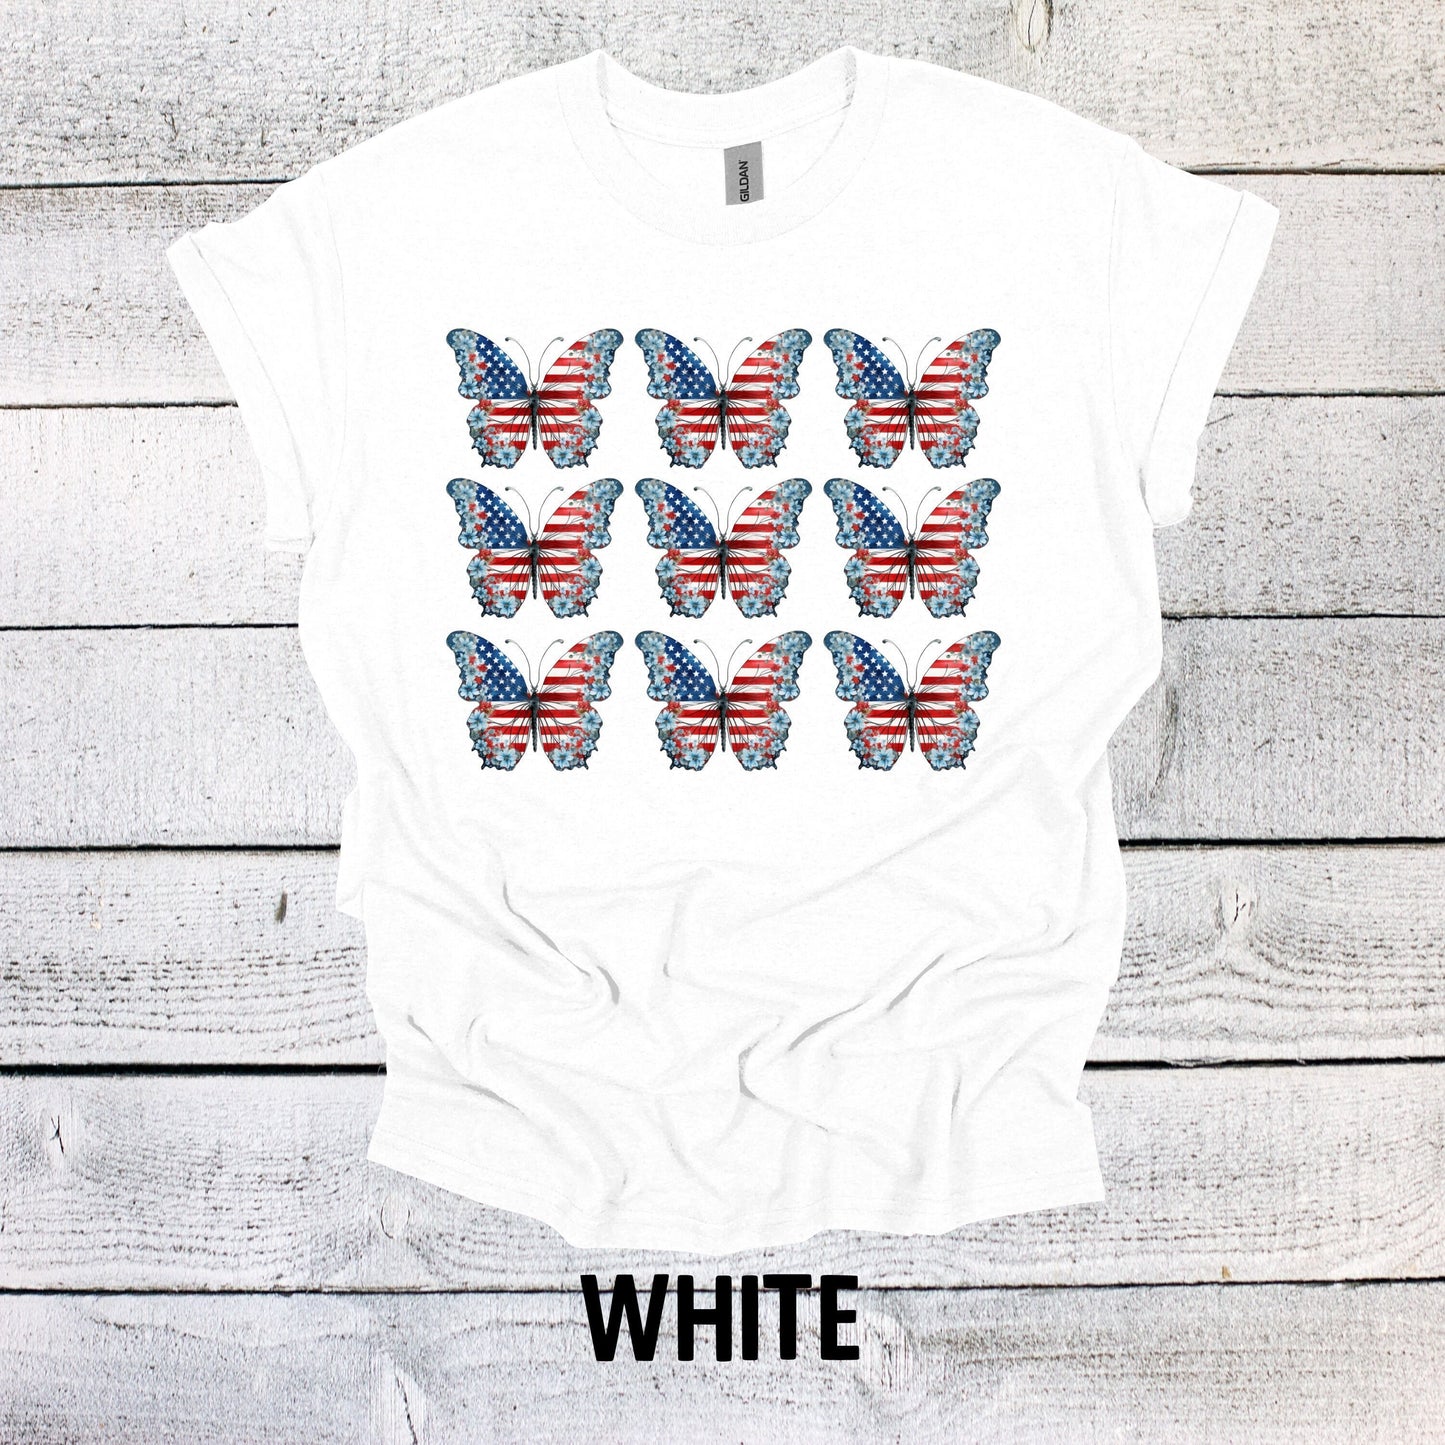 4th of July Shirt with Flag Butterflies - Festive Patriotic Top for Independence Day